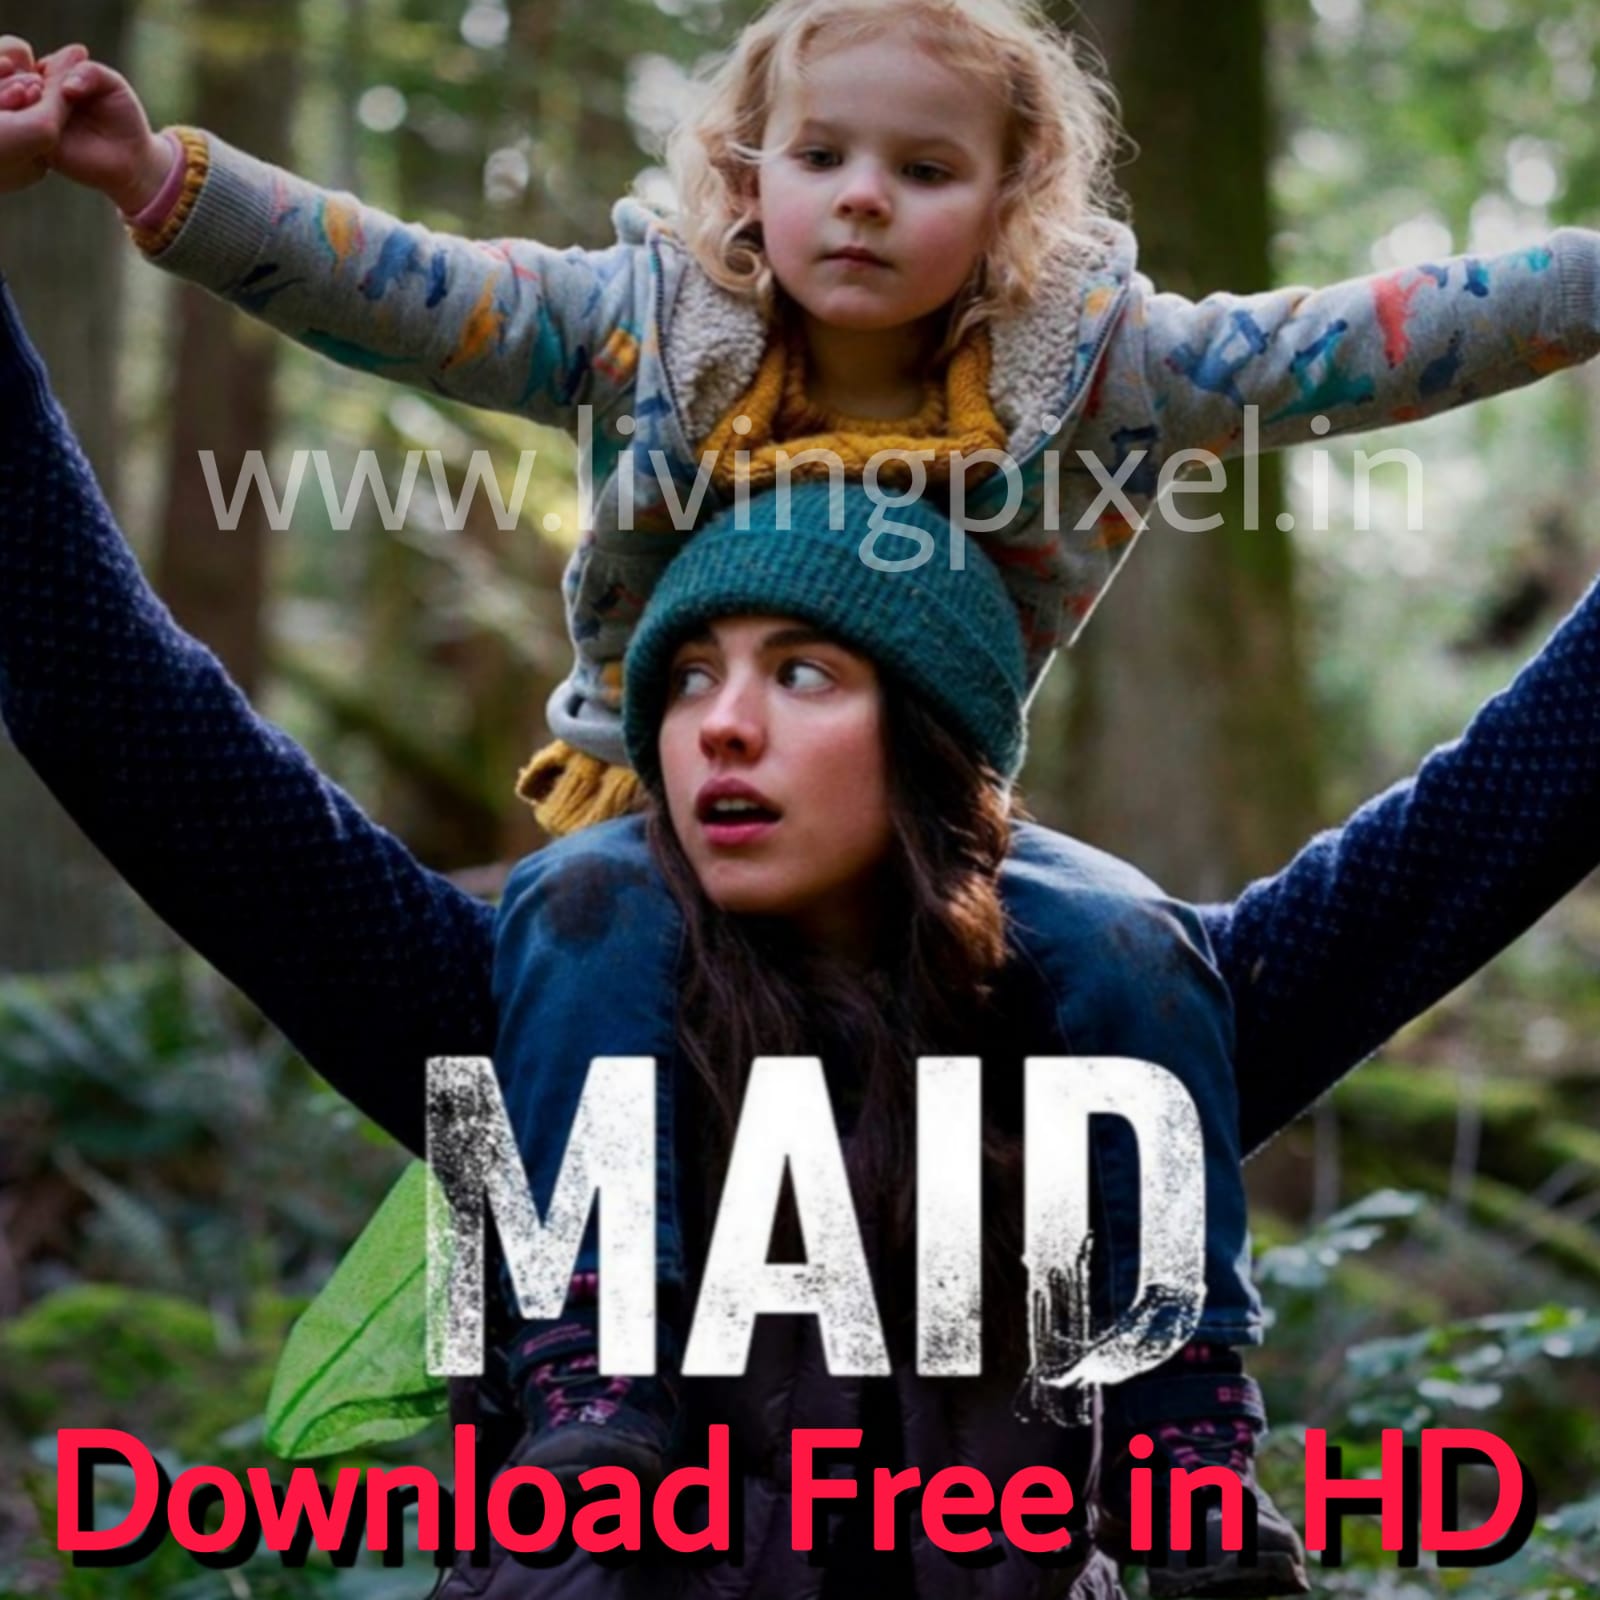 Maid television series download free in HD thumb